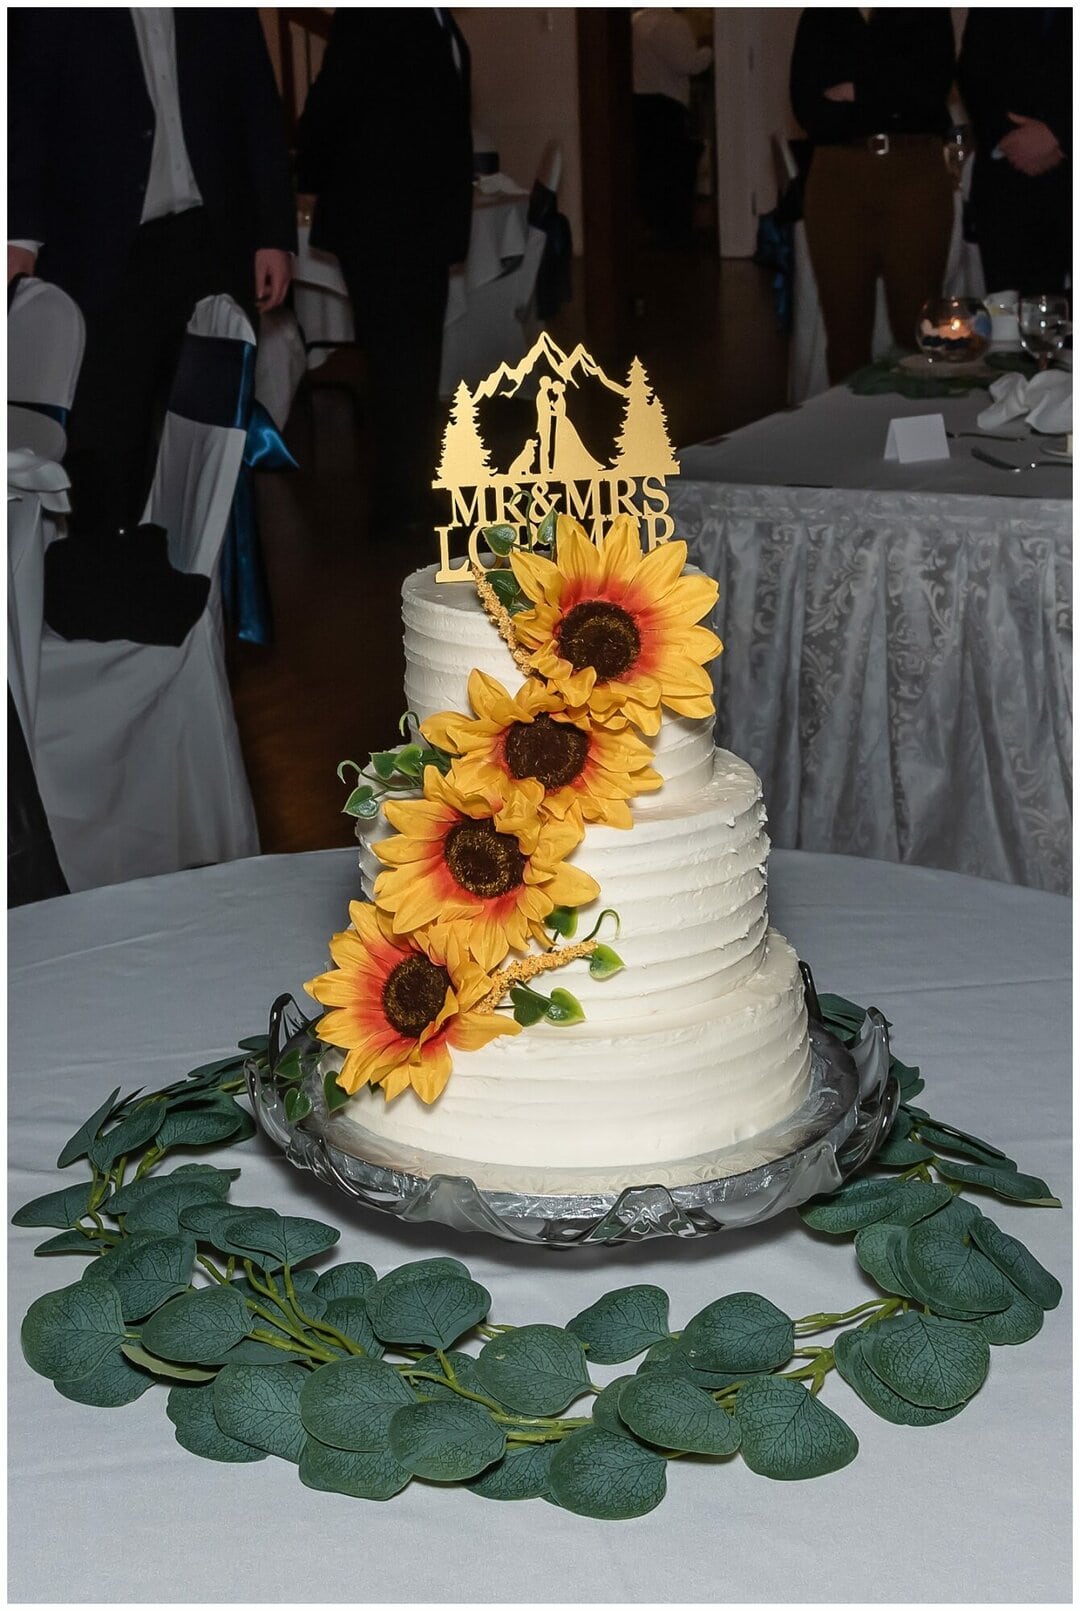 A buttery wedding cake adorned with sunflower decorations.